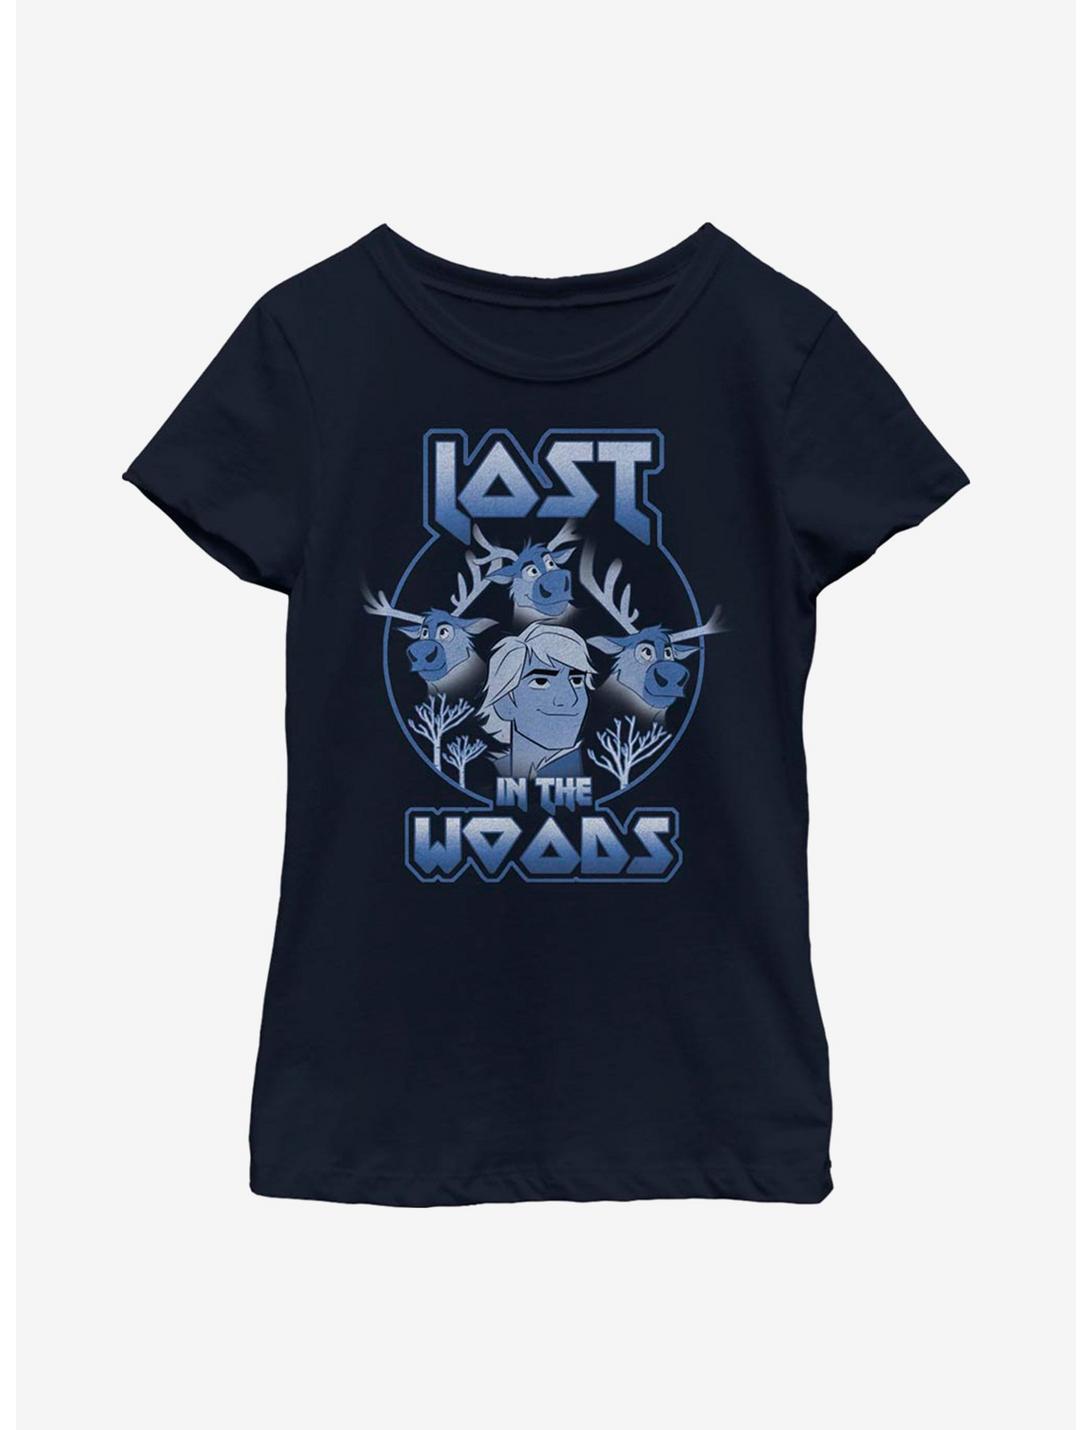 Disney Frozen 2 Kristoff Lost In The Woods Band Youth Girls T-Shirt, NAVY, hi-res